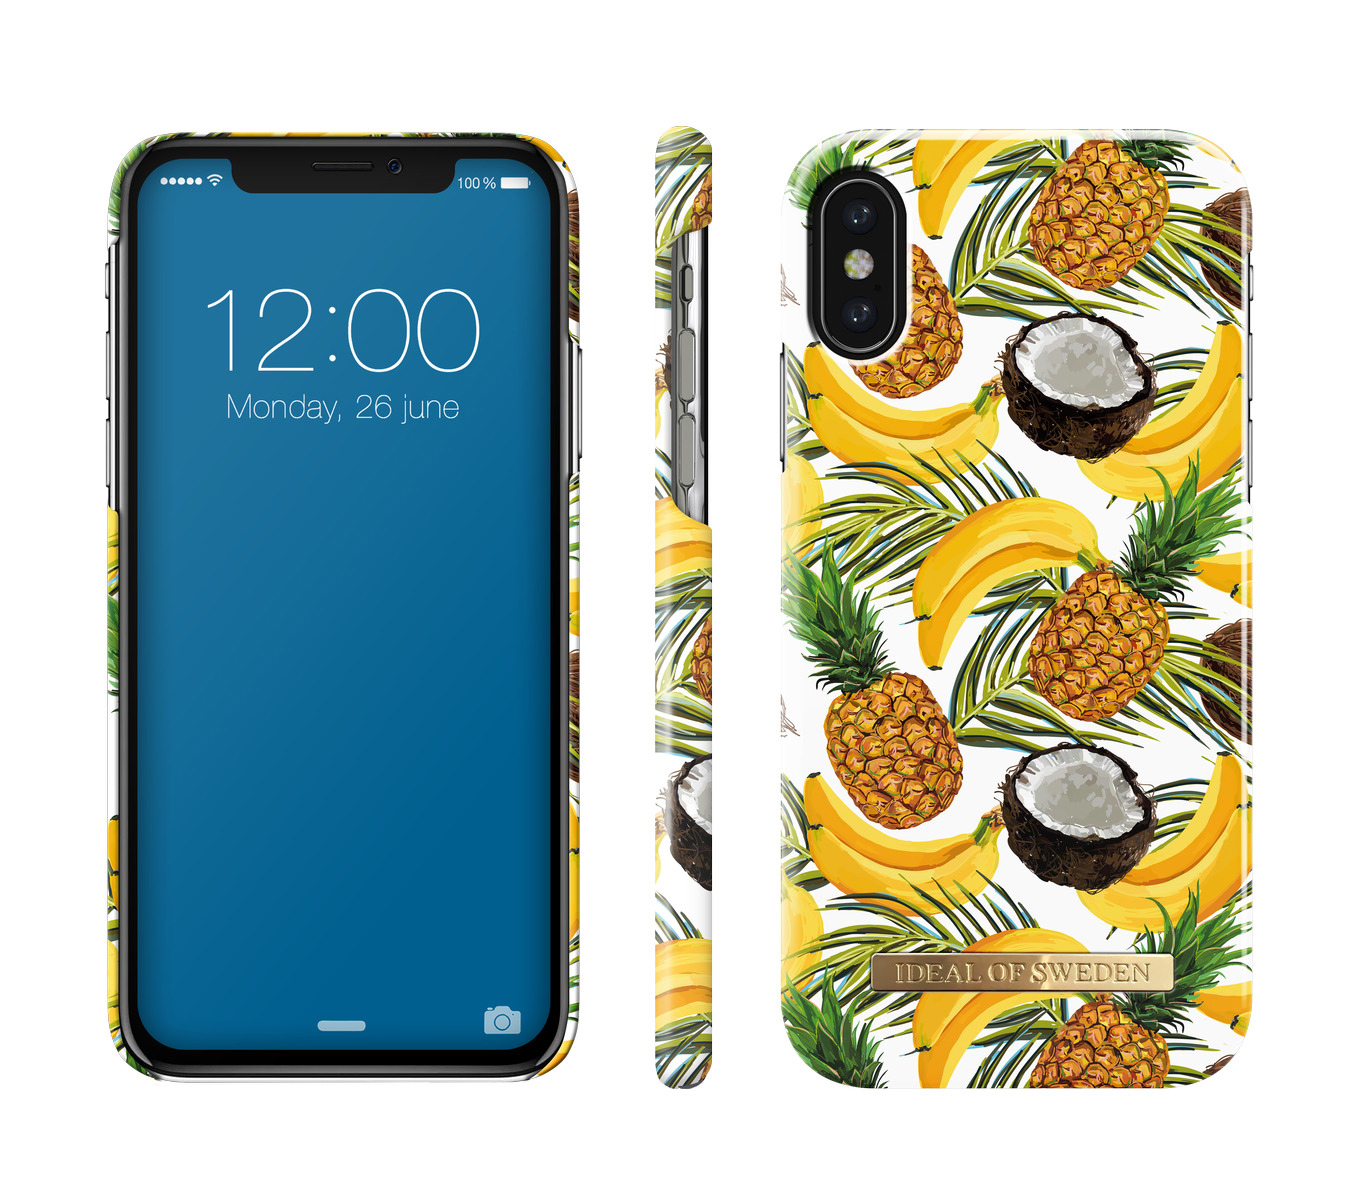 IDEAL Banana Fashion, OF X, iPhone Apple, Backcover, Coconut SWEDEN